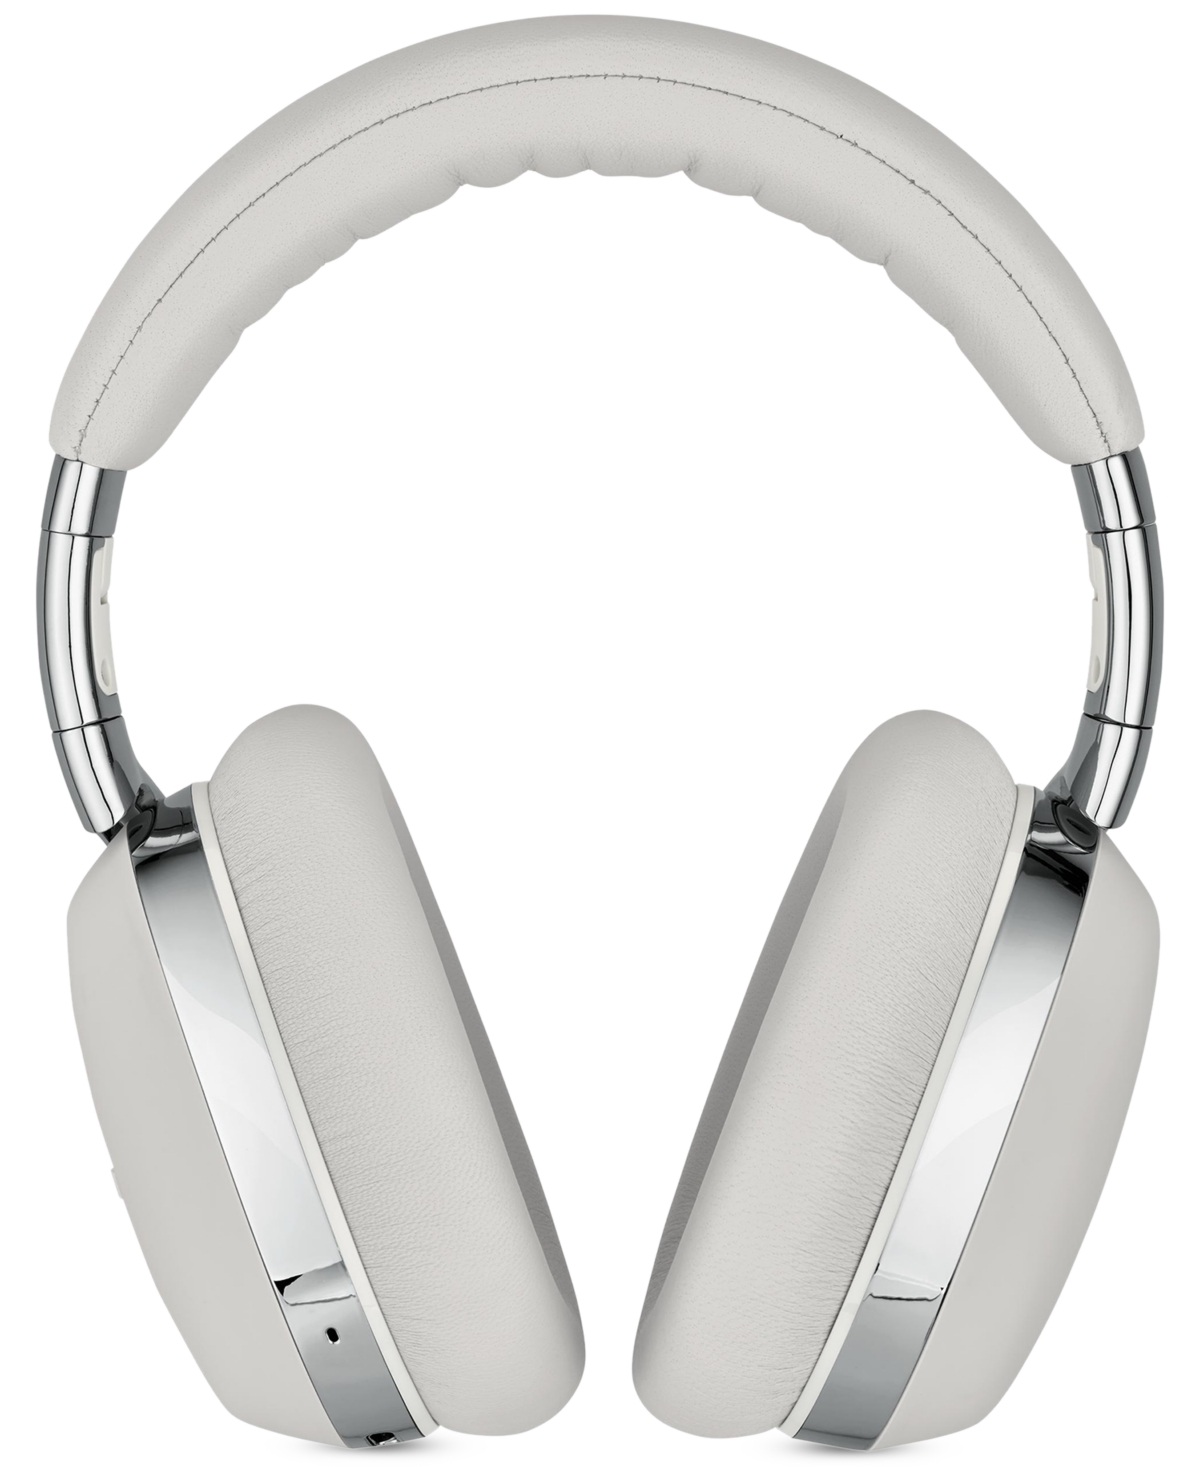 Montblanc Mb 01 Over-ear Headphones In Grey